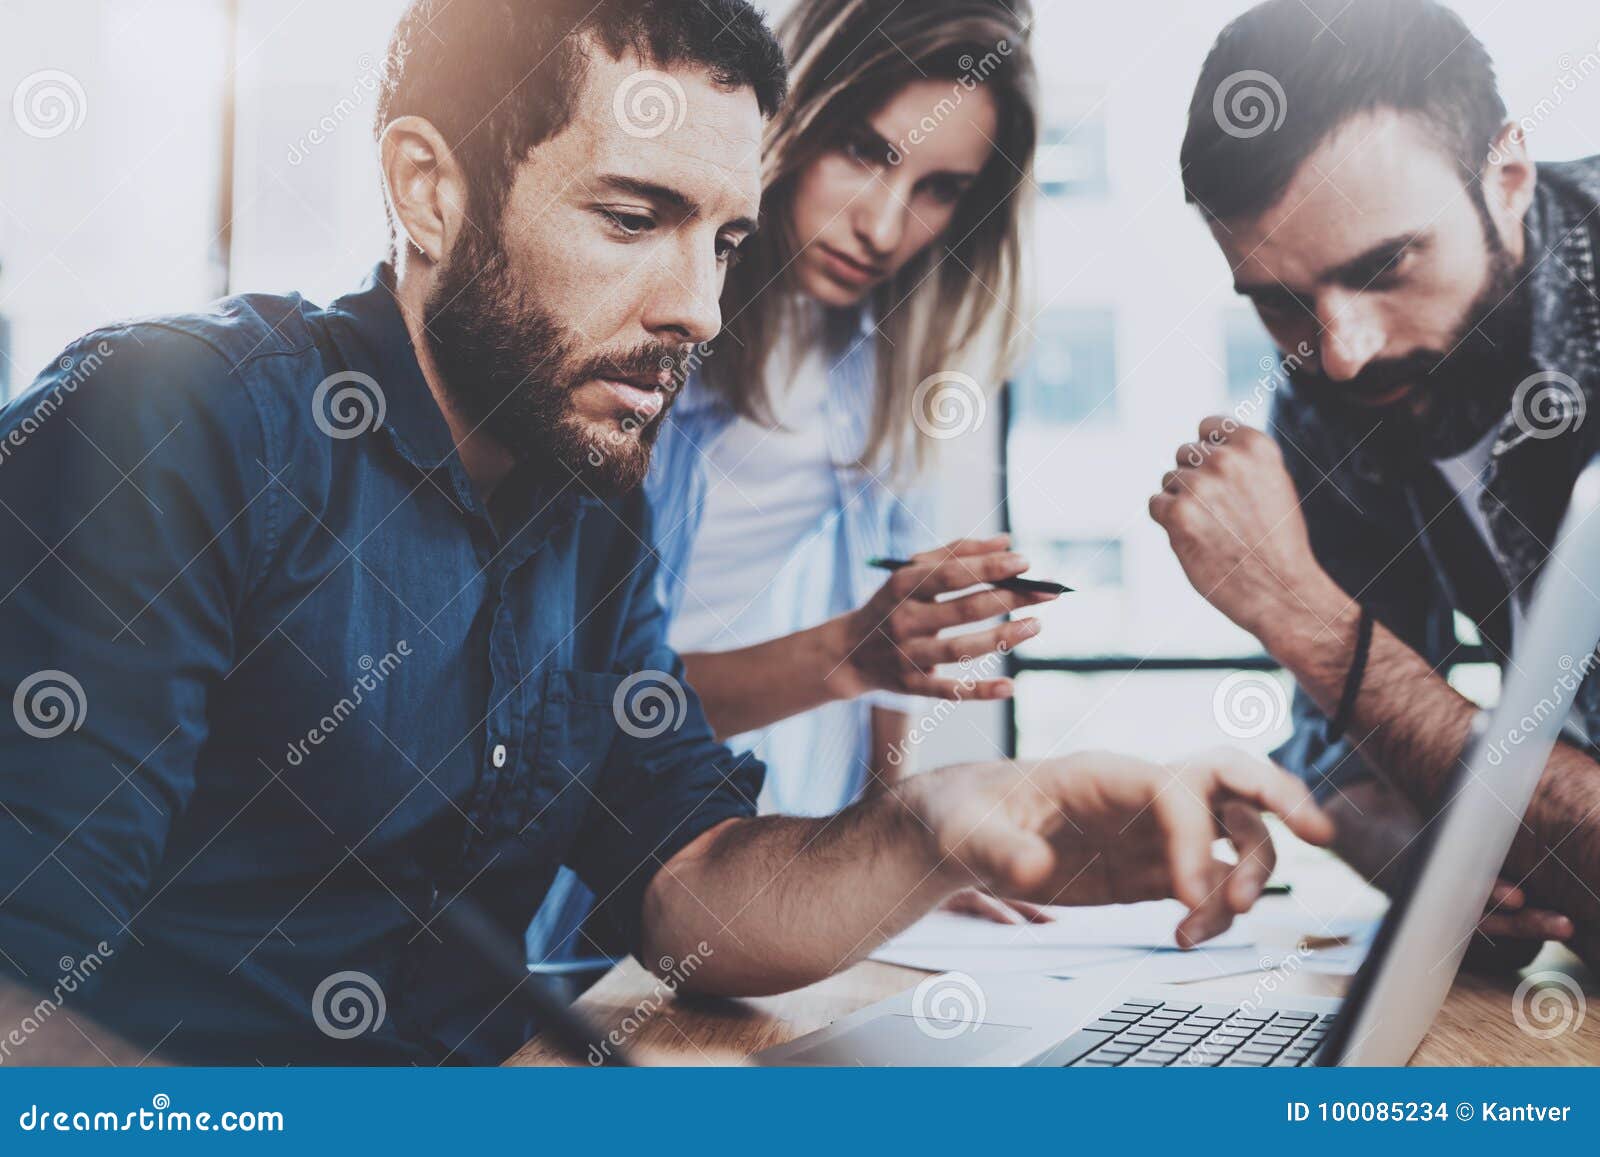 business team concept.young professionals discussing new business project in modern office.group of three people analyze